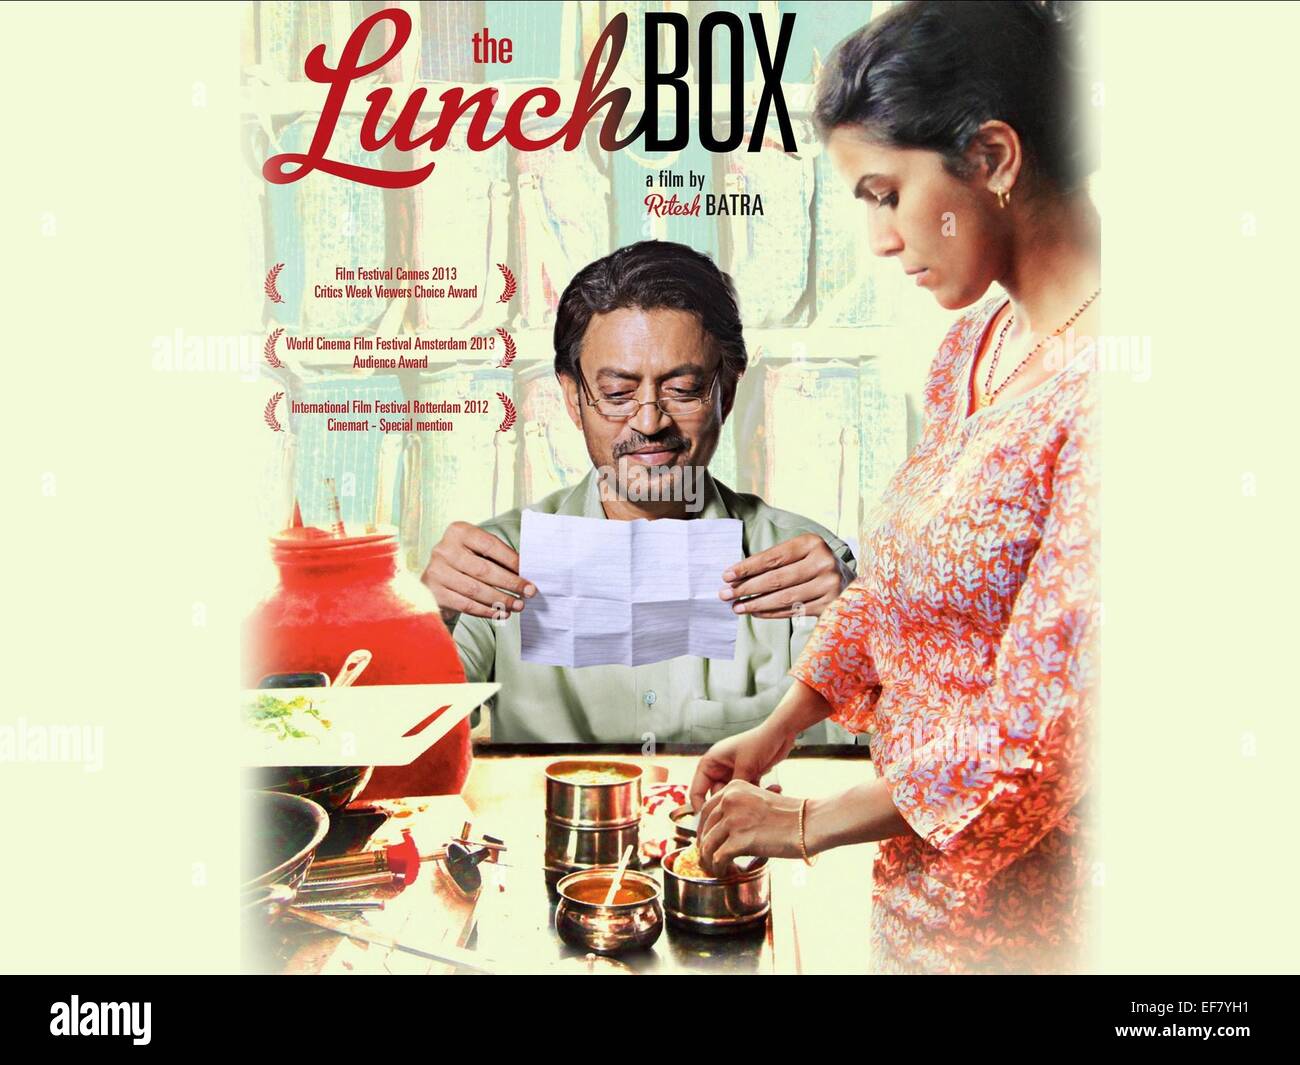 the lunchbox full movie 2013